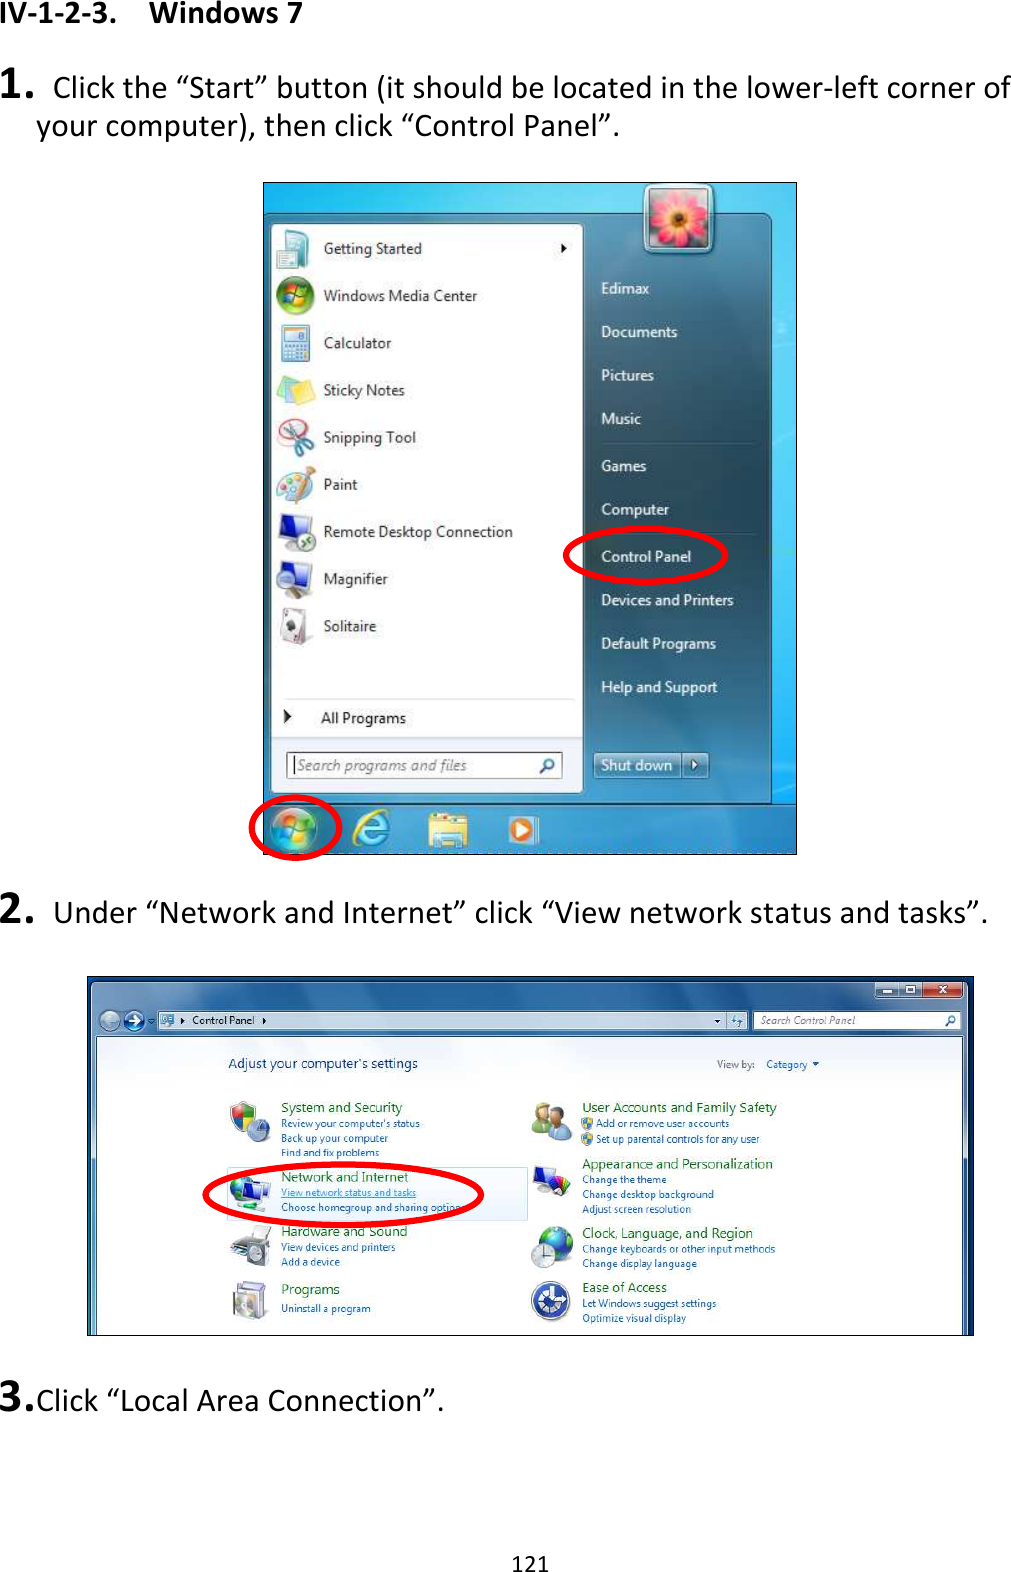 121 IV-1-2-3.  Windows 7  1.   Click the “Start” button (it should be located in the lower-left corner of your computer), then click “Control Panel”.    2.   Under “Network and Internet” click “View network status and tasks”.    3. Click “Local Area Connection”.  